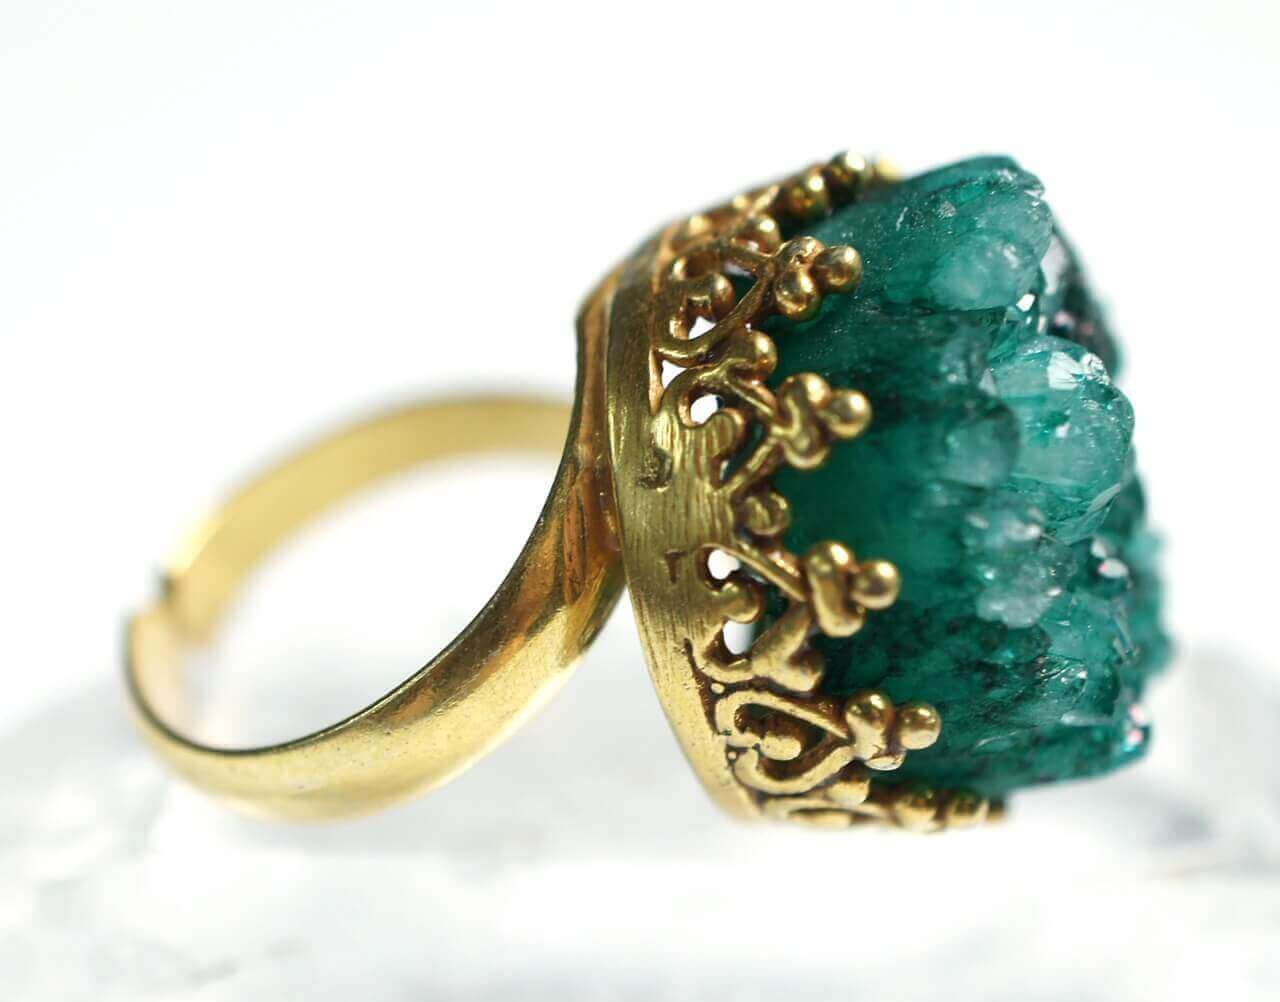 An ornate gold ring with a green quartz center stone